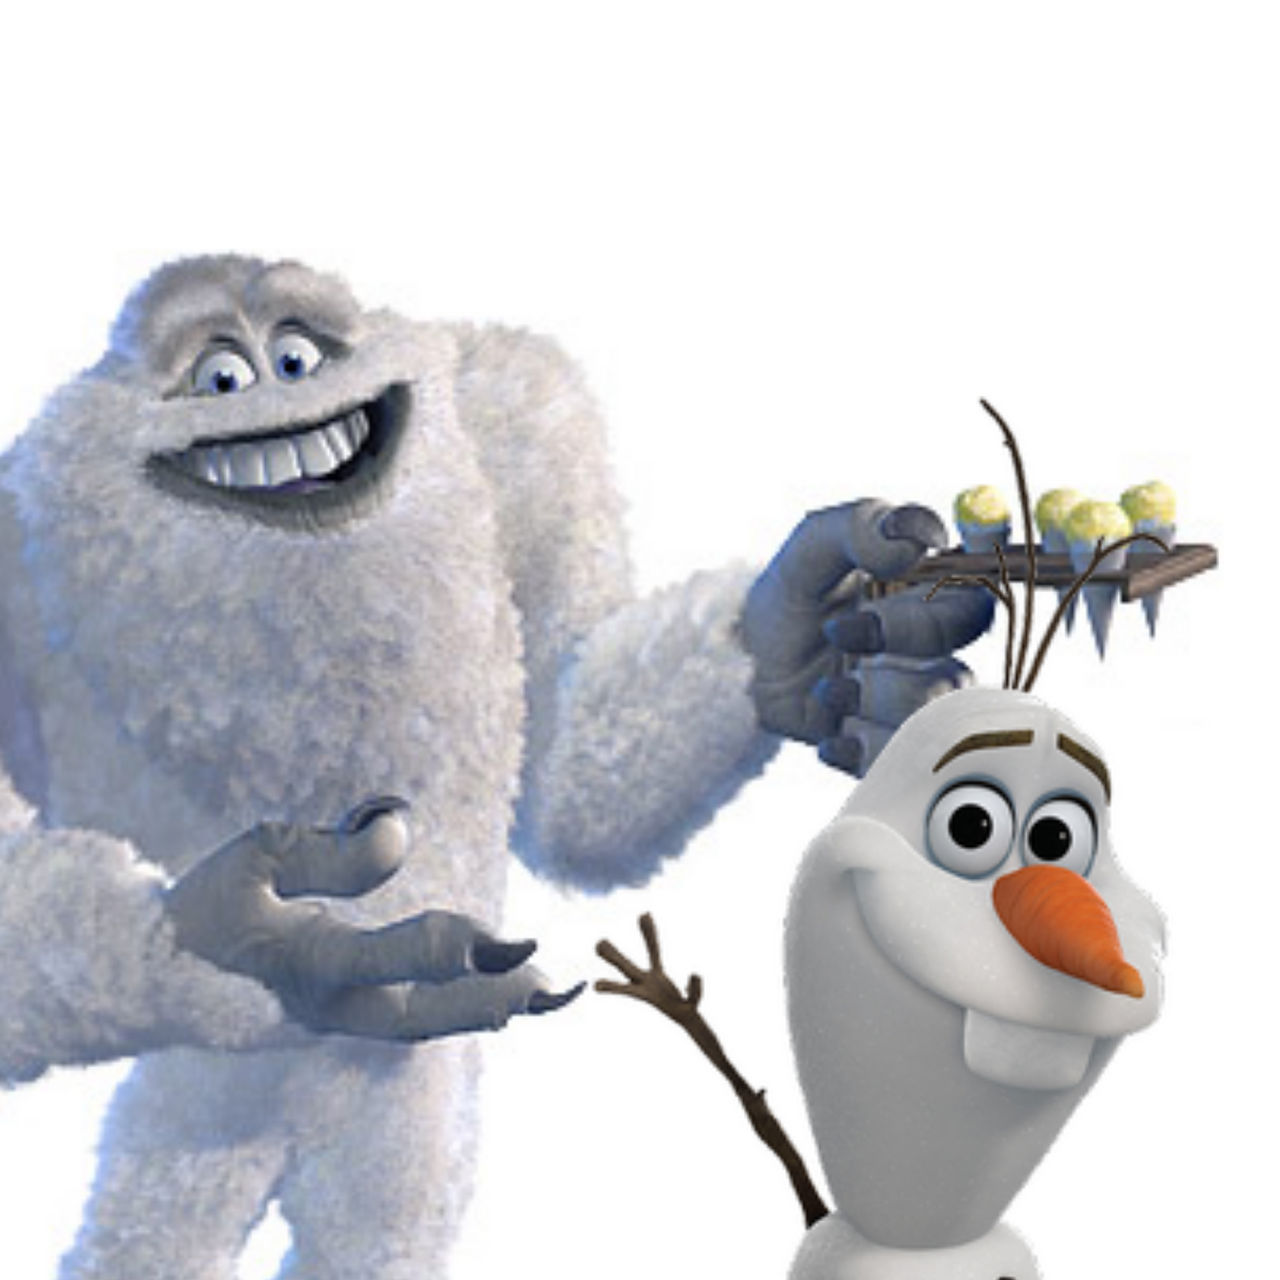 Abominable And Olaf (Monsters Inc/Frozen) by EBOTIZER on DeviantArt